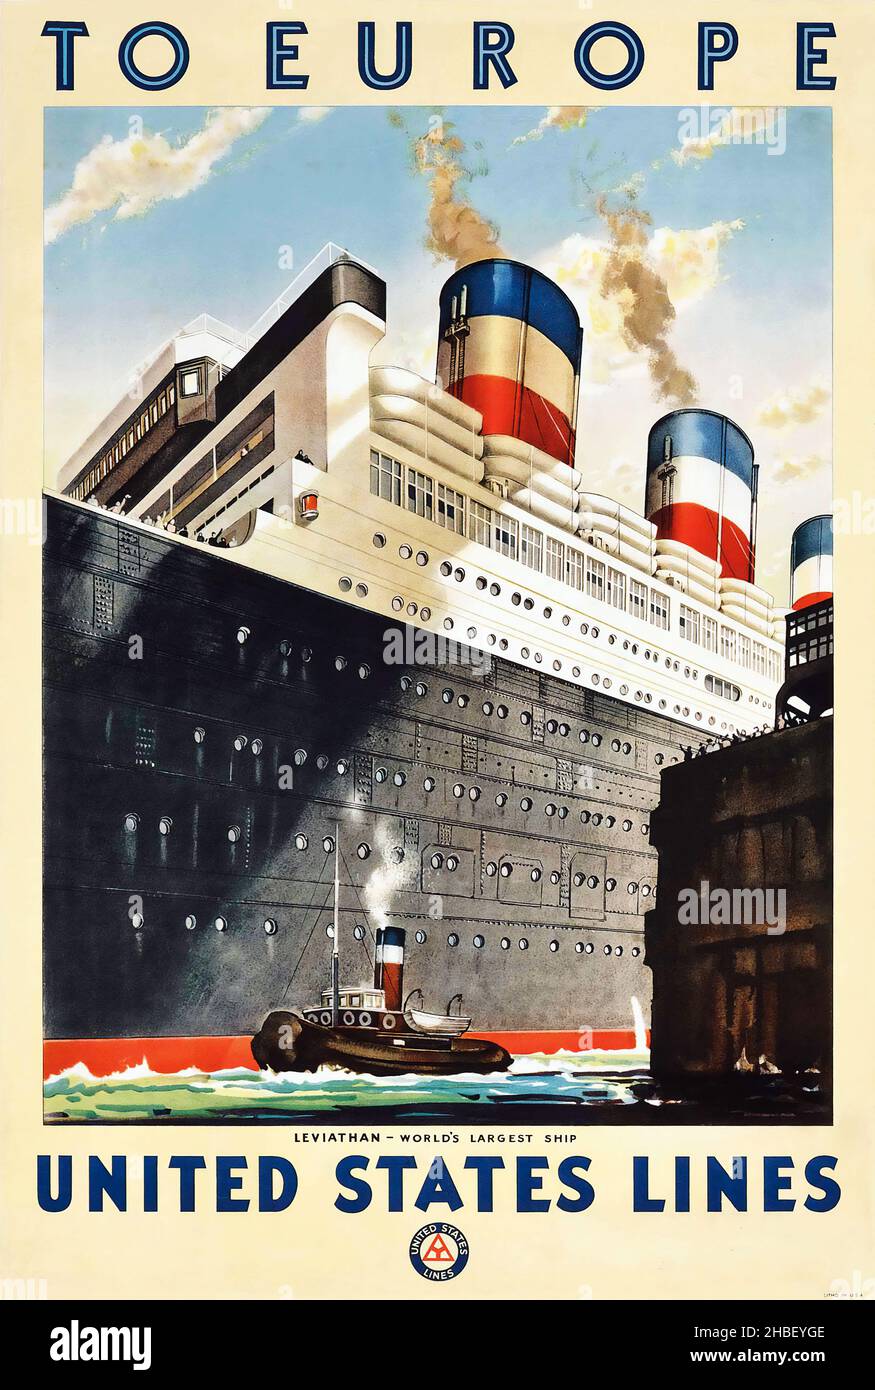 To Europe United States Lines SS Leviathan by R.S. Pike - c.1928 Stock Photo